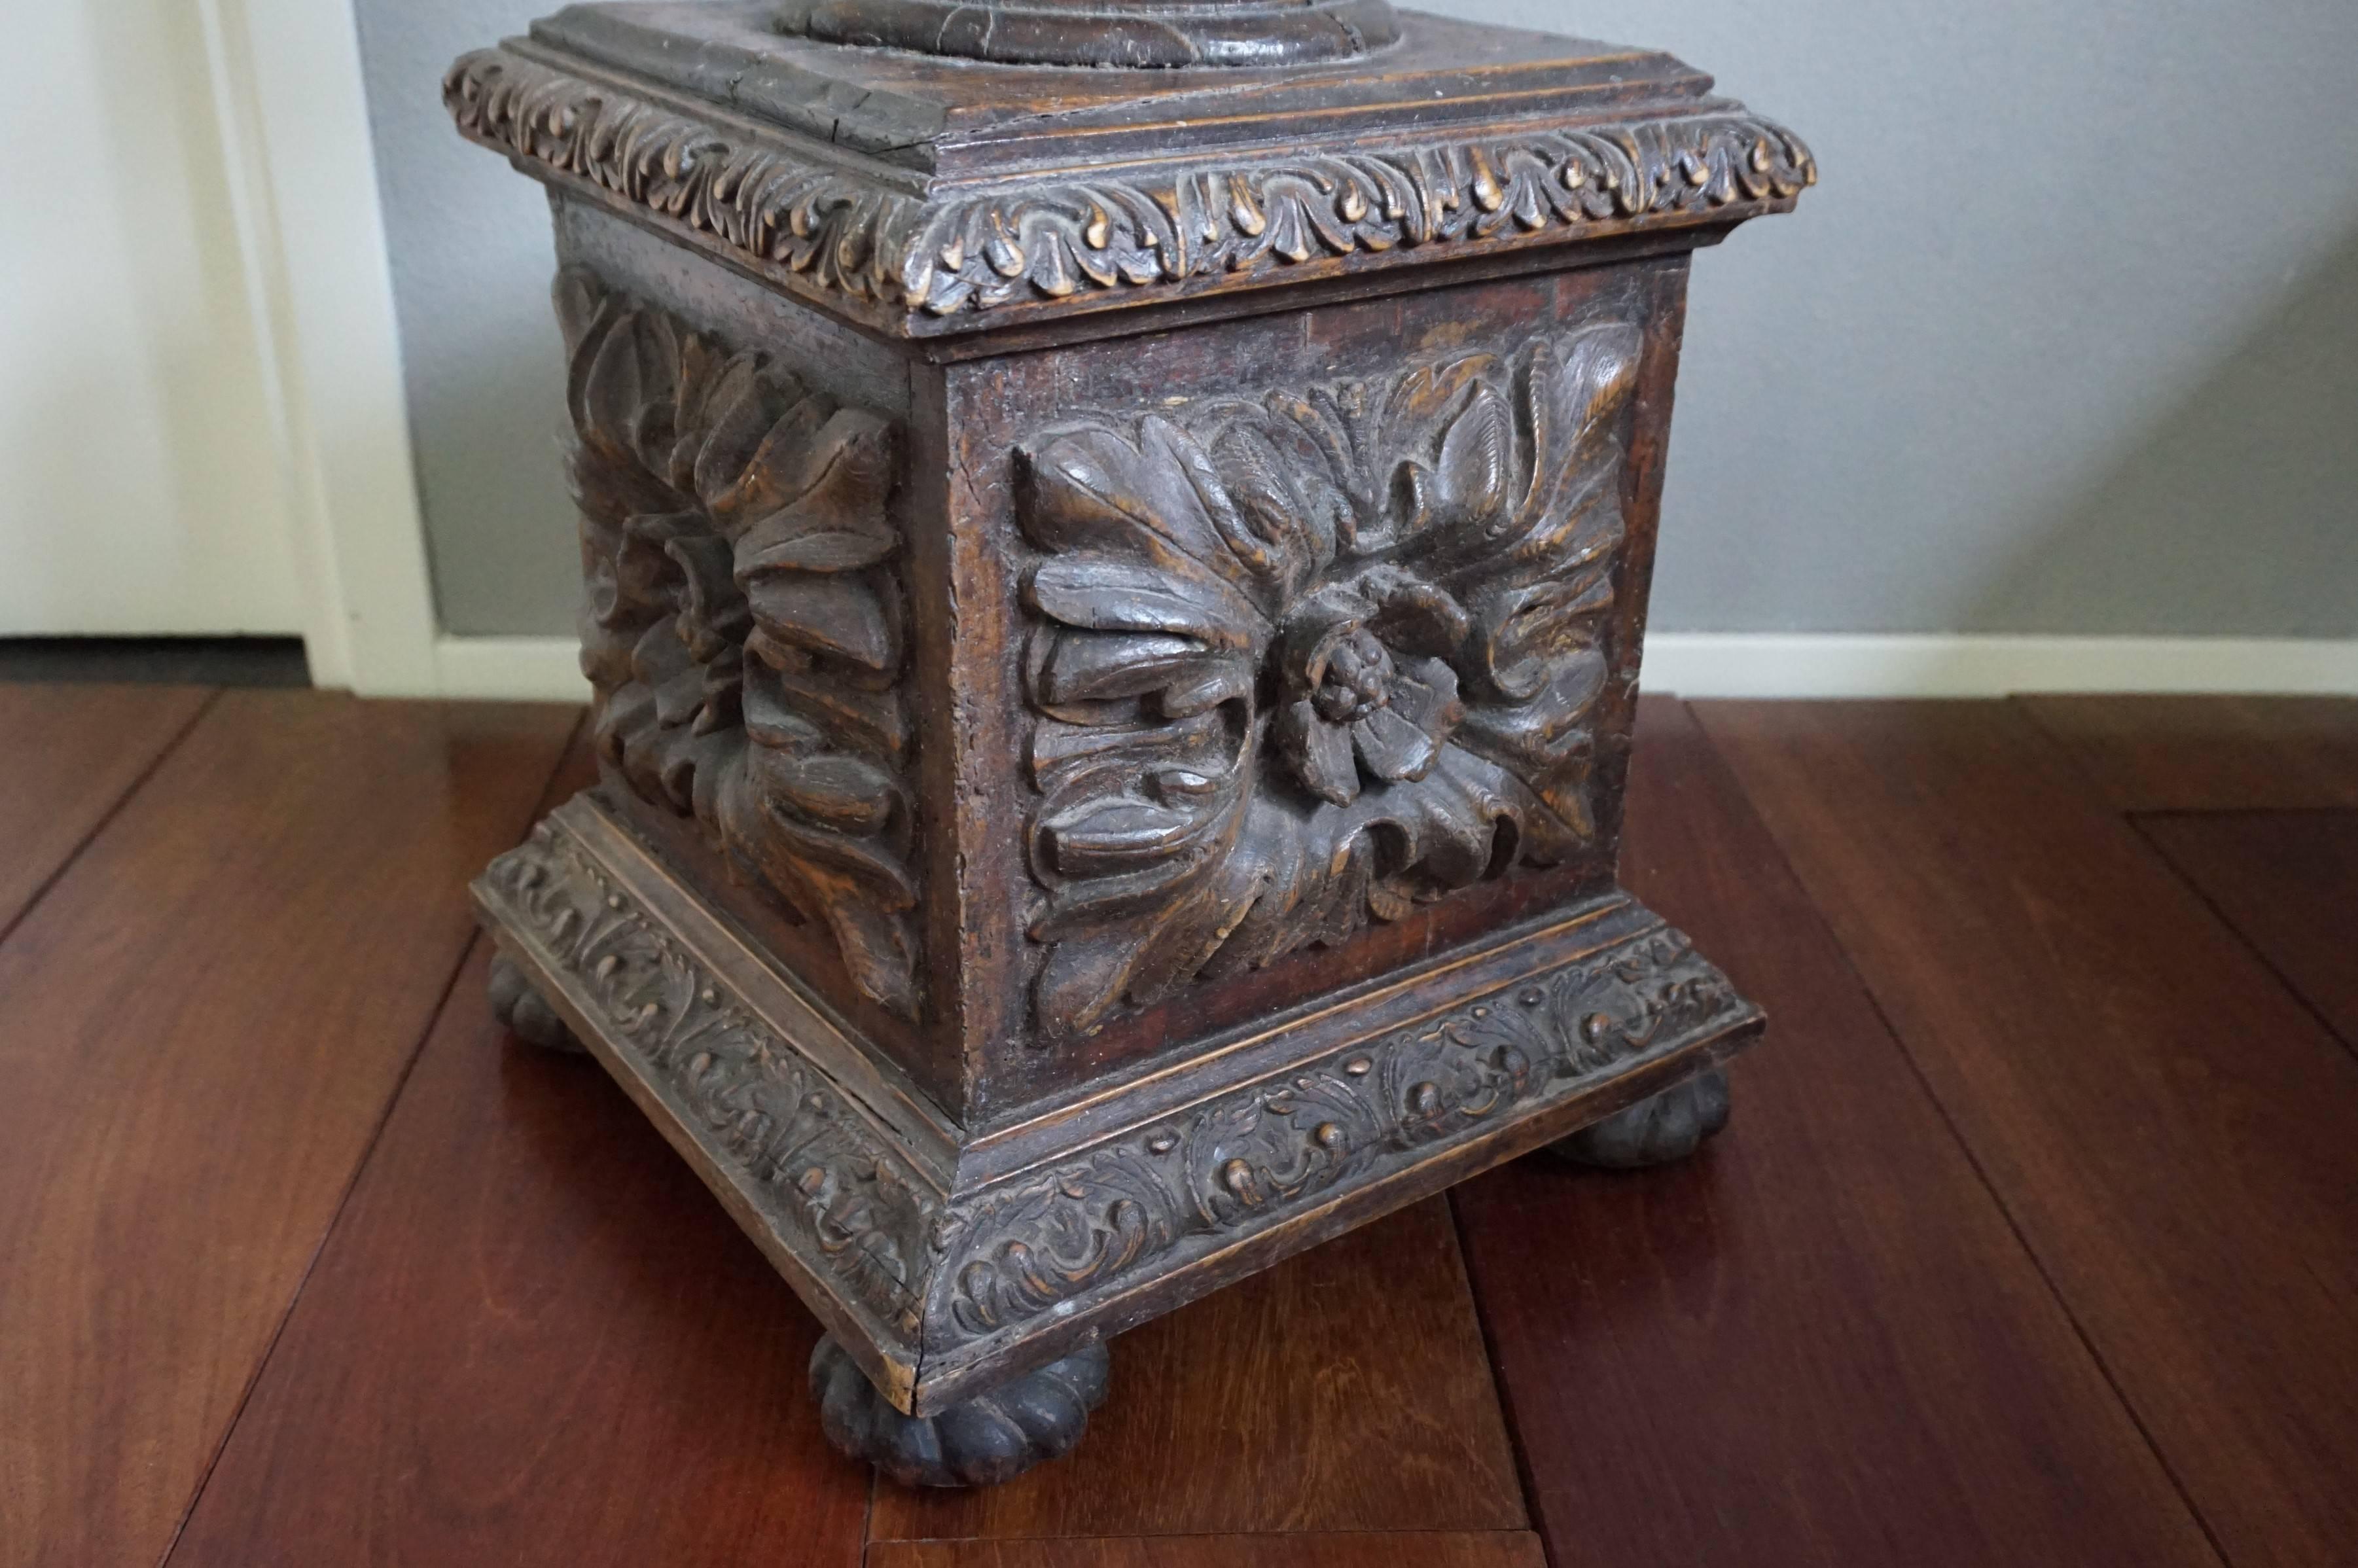 Antique Large & Hand-Carved Mid-19th Century Baroque Pedestal / Sculpture Stand 1